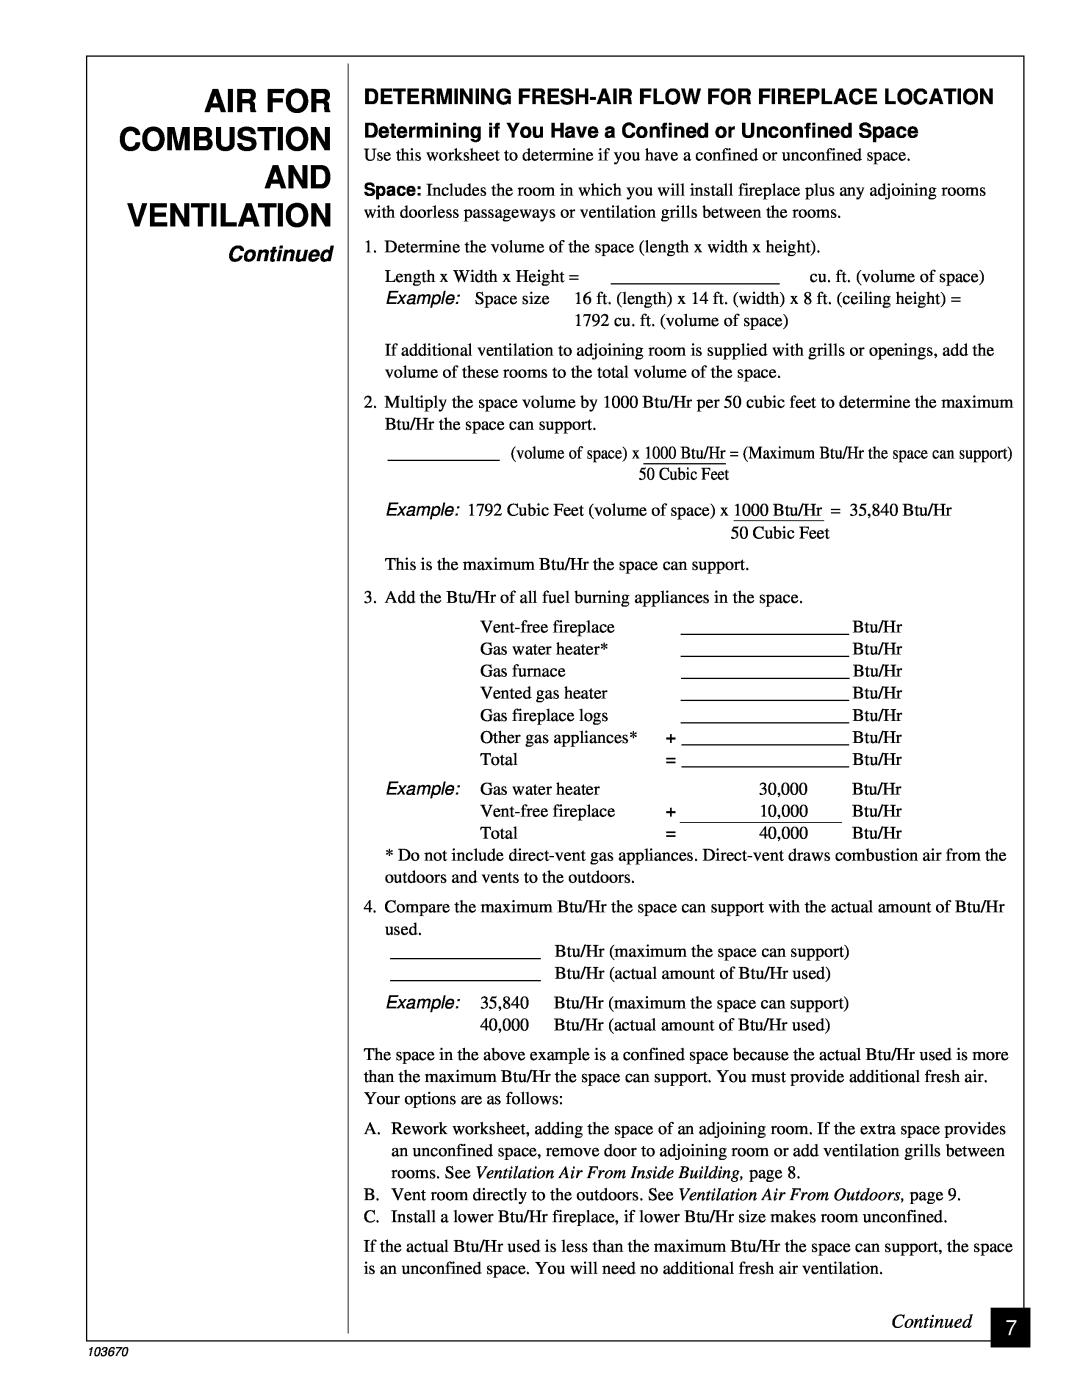 Vanguard Heating VMH10TN Combustion, Determining Fresh-Airflow For Fireplace Location, Continued, Air For, Ventilation 